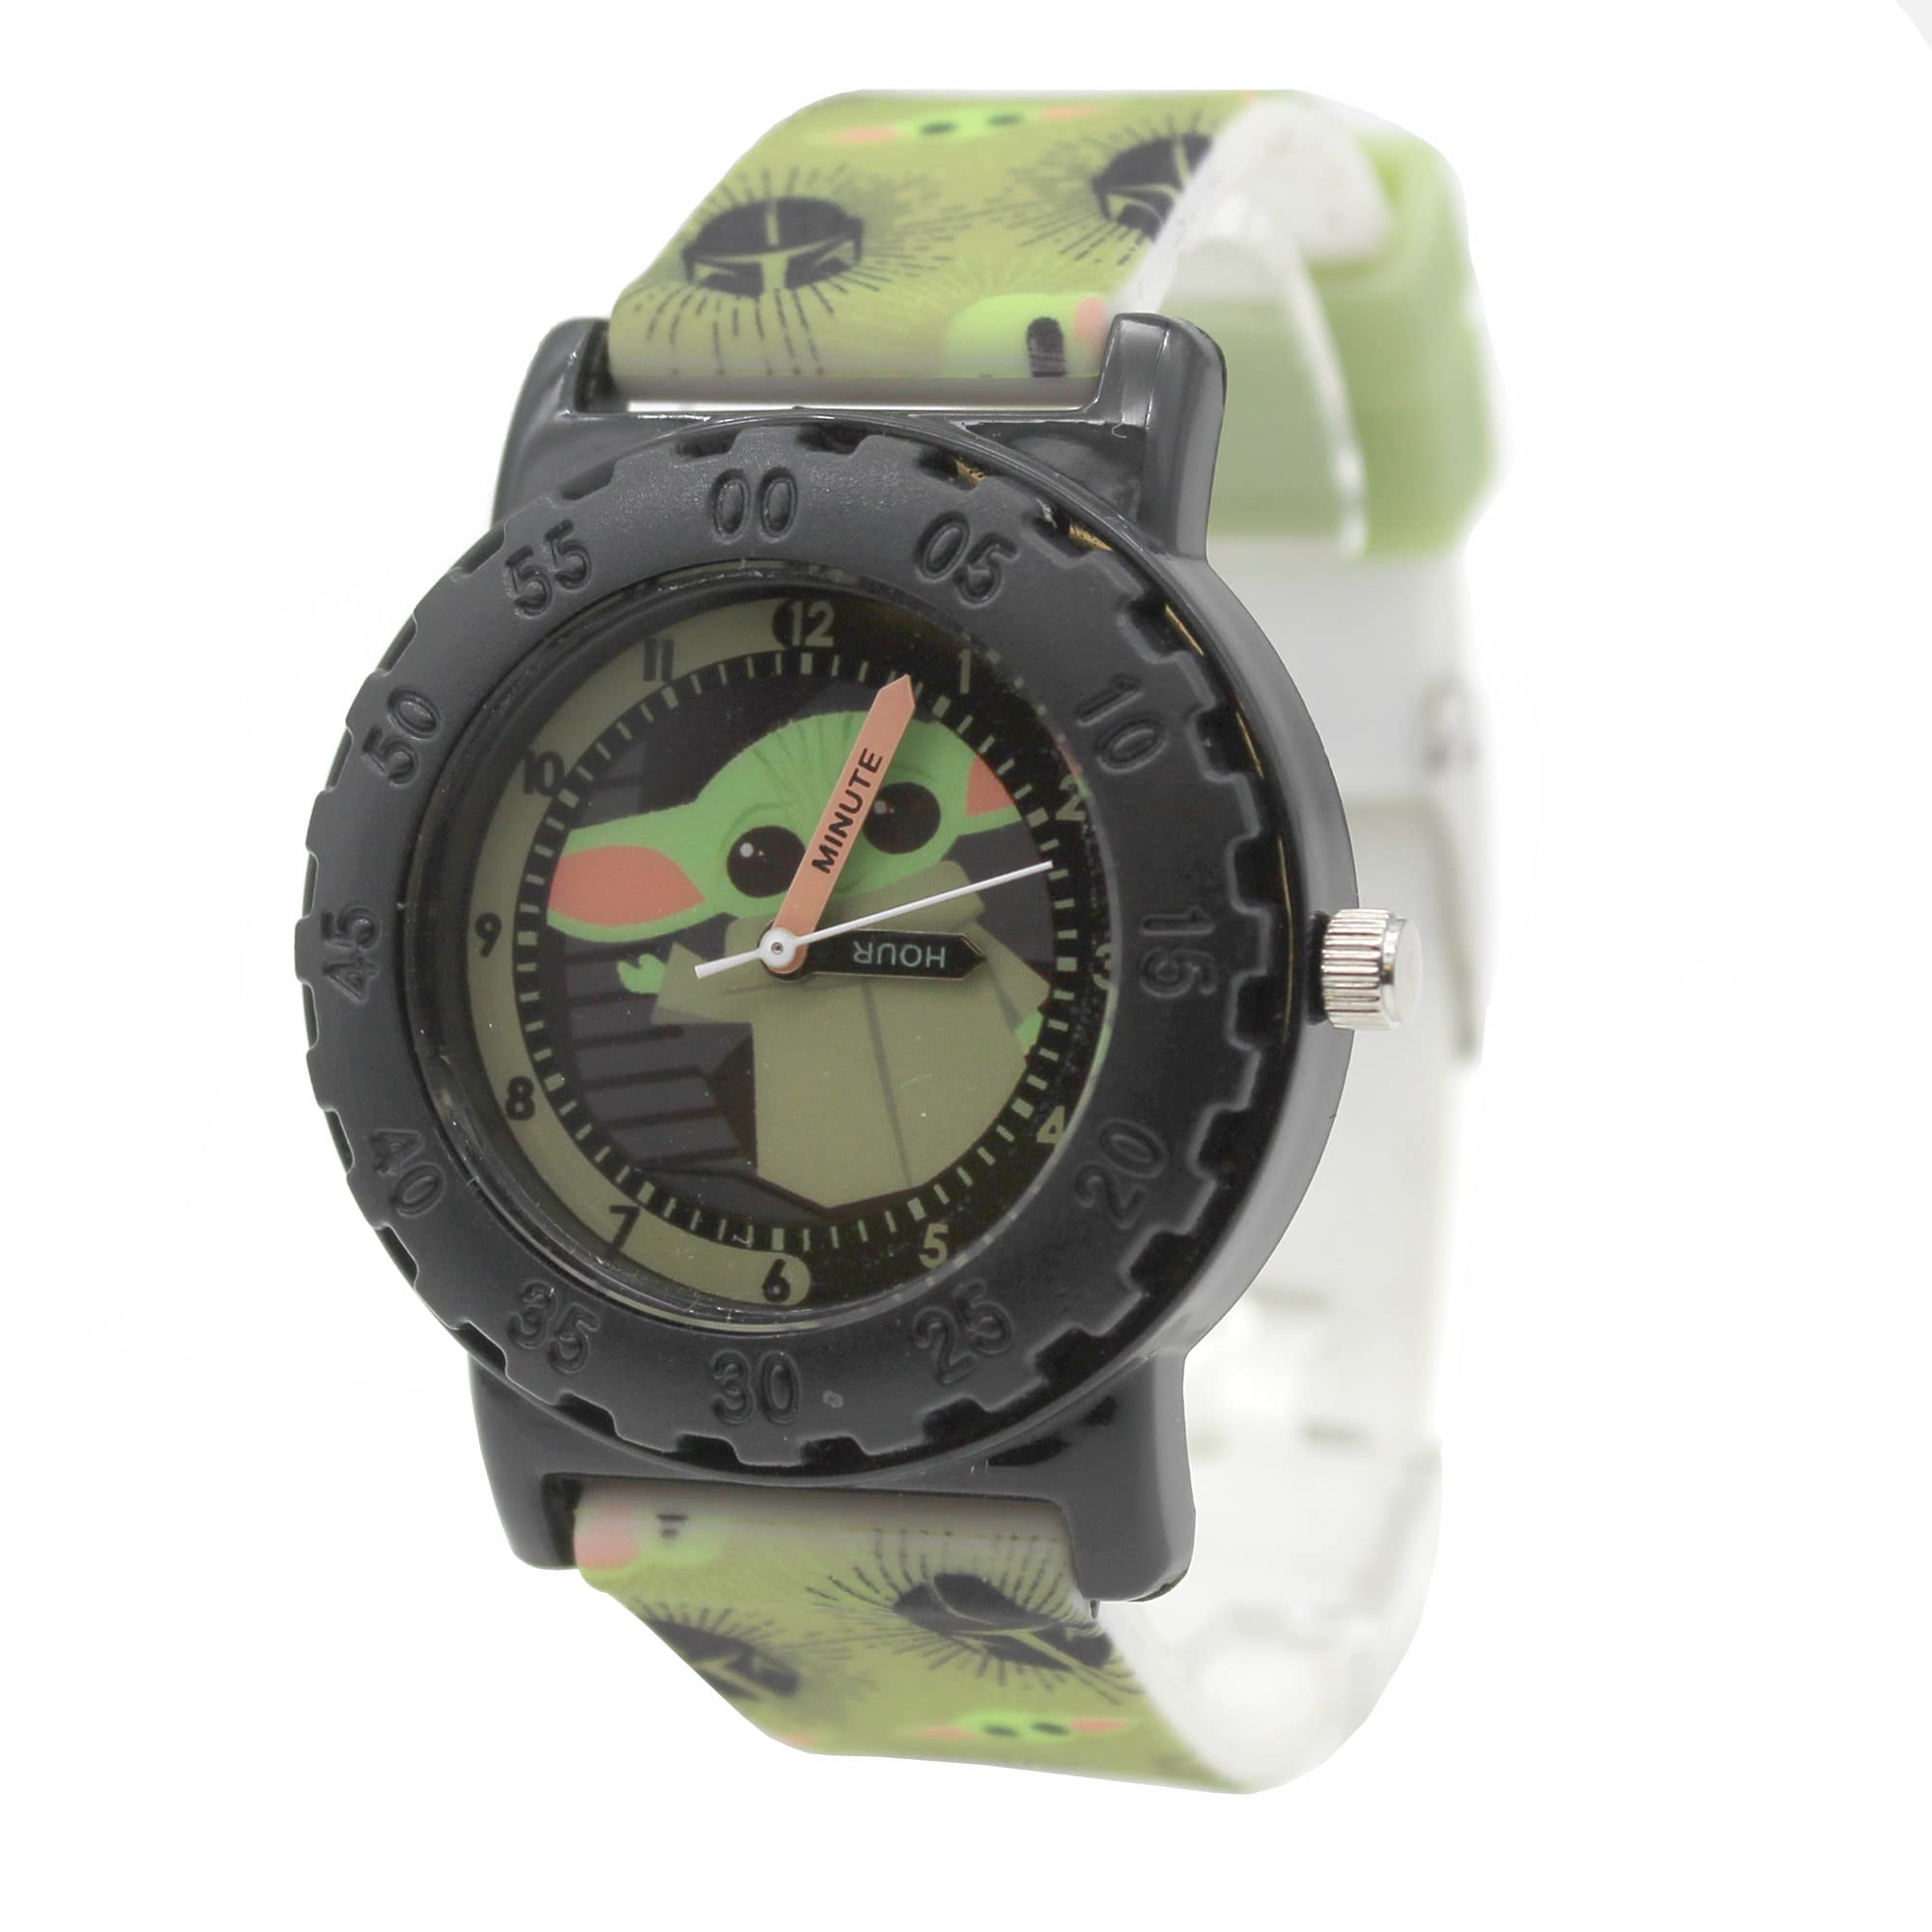 Accutime Kids Star Wars Baby Yoda Analog Quartz Wrist Watch with Small Face, Black Accents for Girls, Boys, Kids All Ages (MNL9003AZ), Green